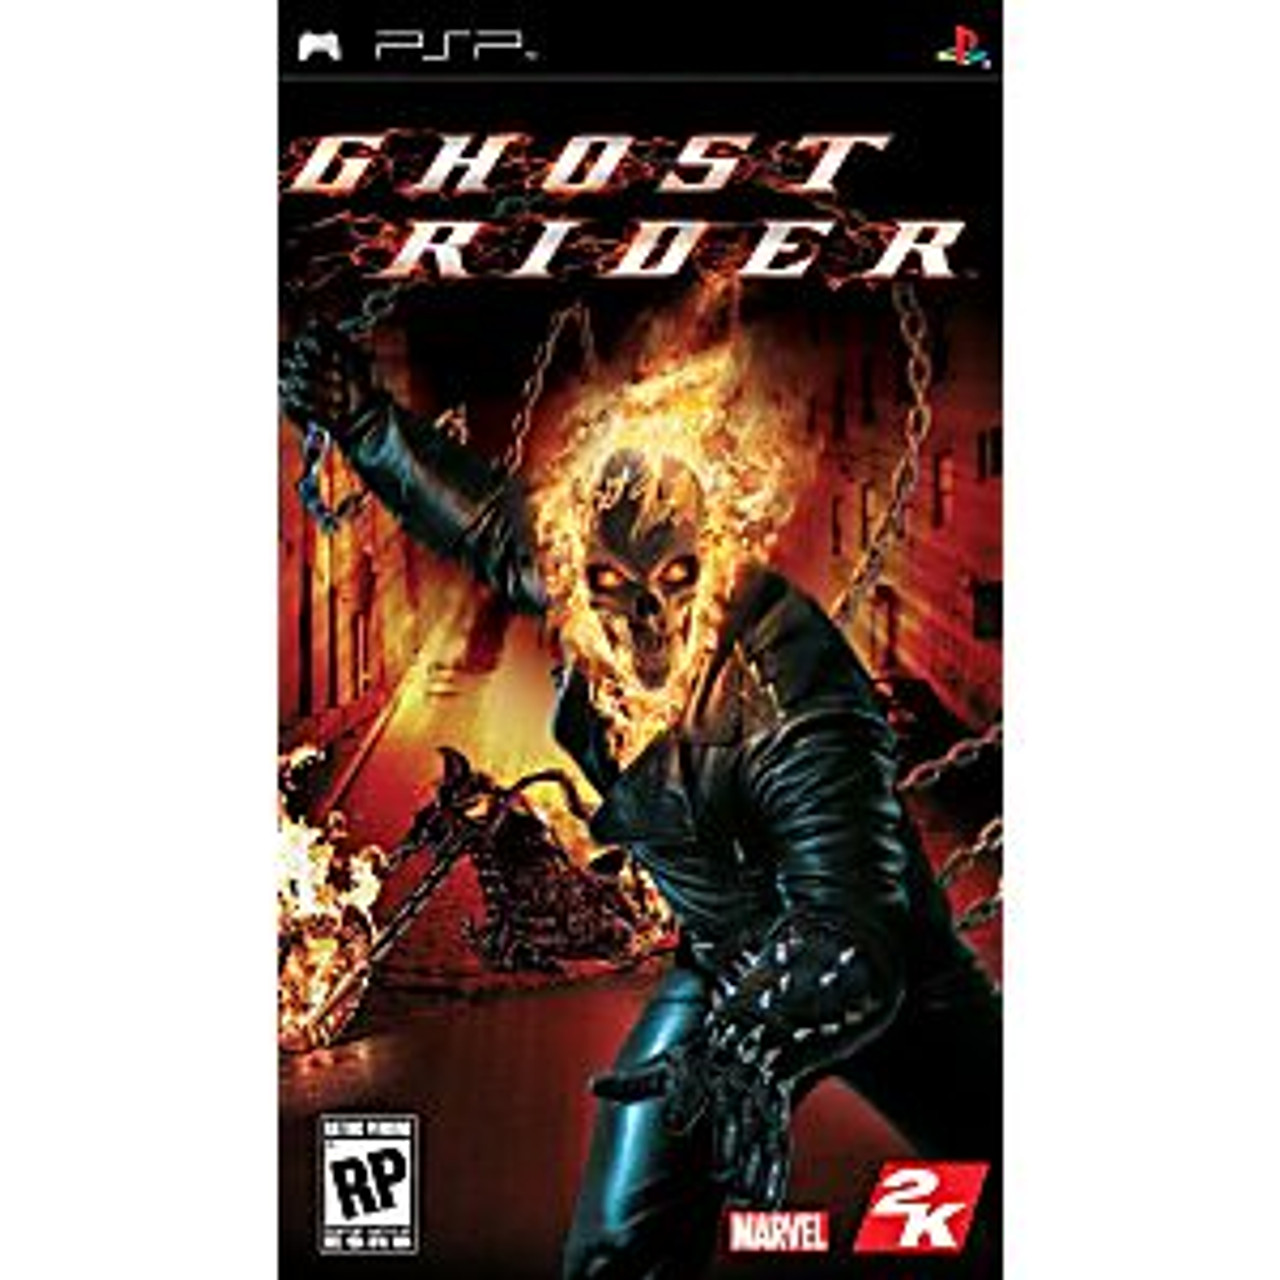 GHOST RIDER [T] - PSP